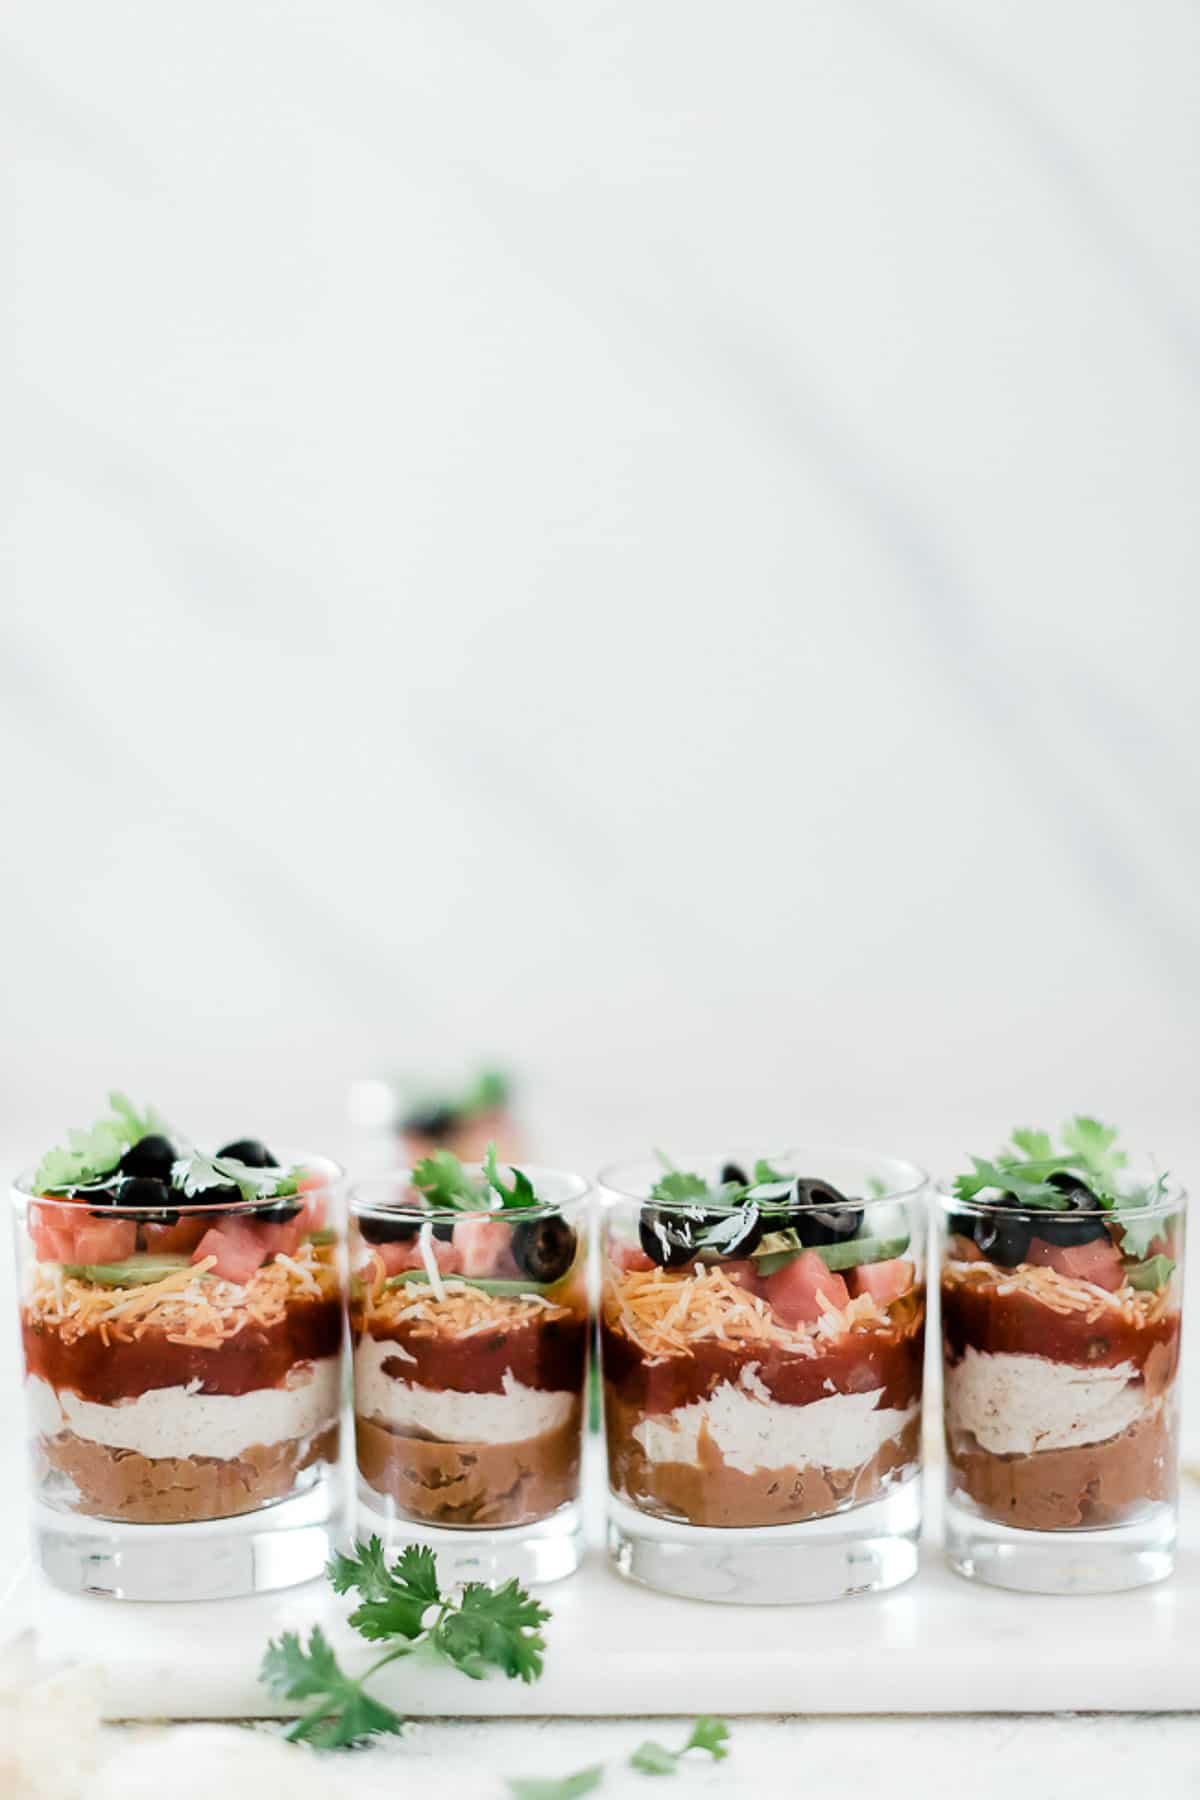 4 individual layered taco dips lined up. There are variations in the size of the glasses.